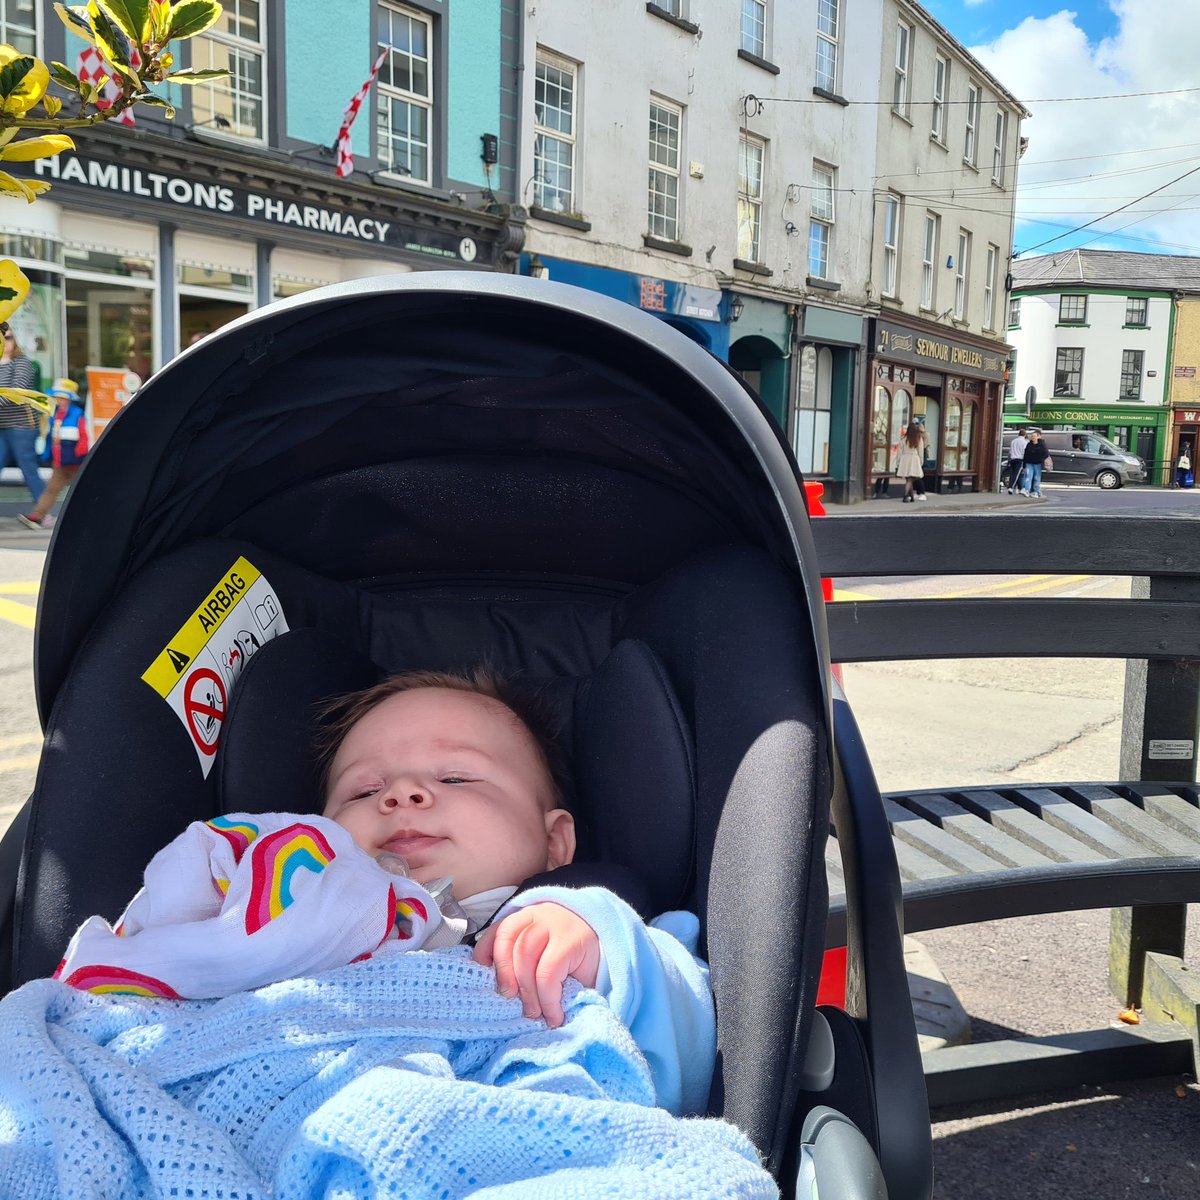 Lewis has finally made it down to his 'real home' of Skibbereen. Lovely sunny day in West Cork.